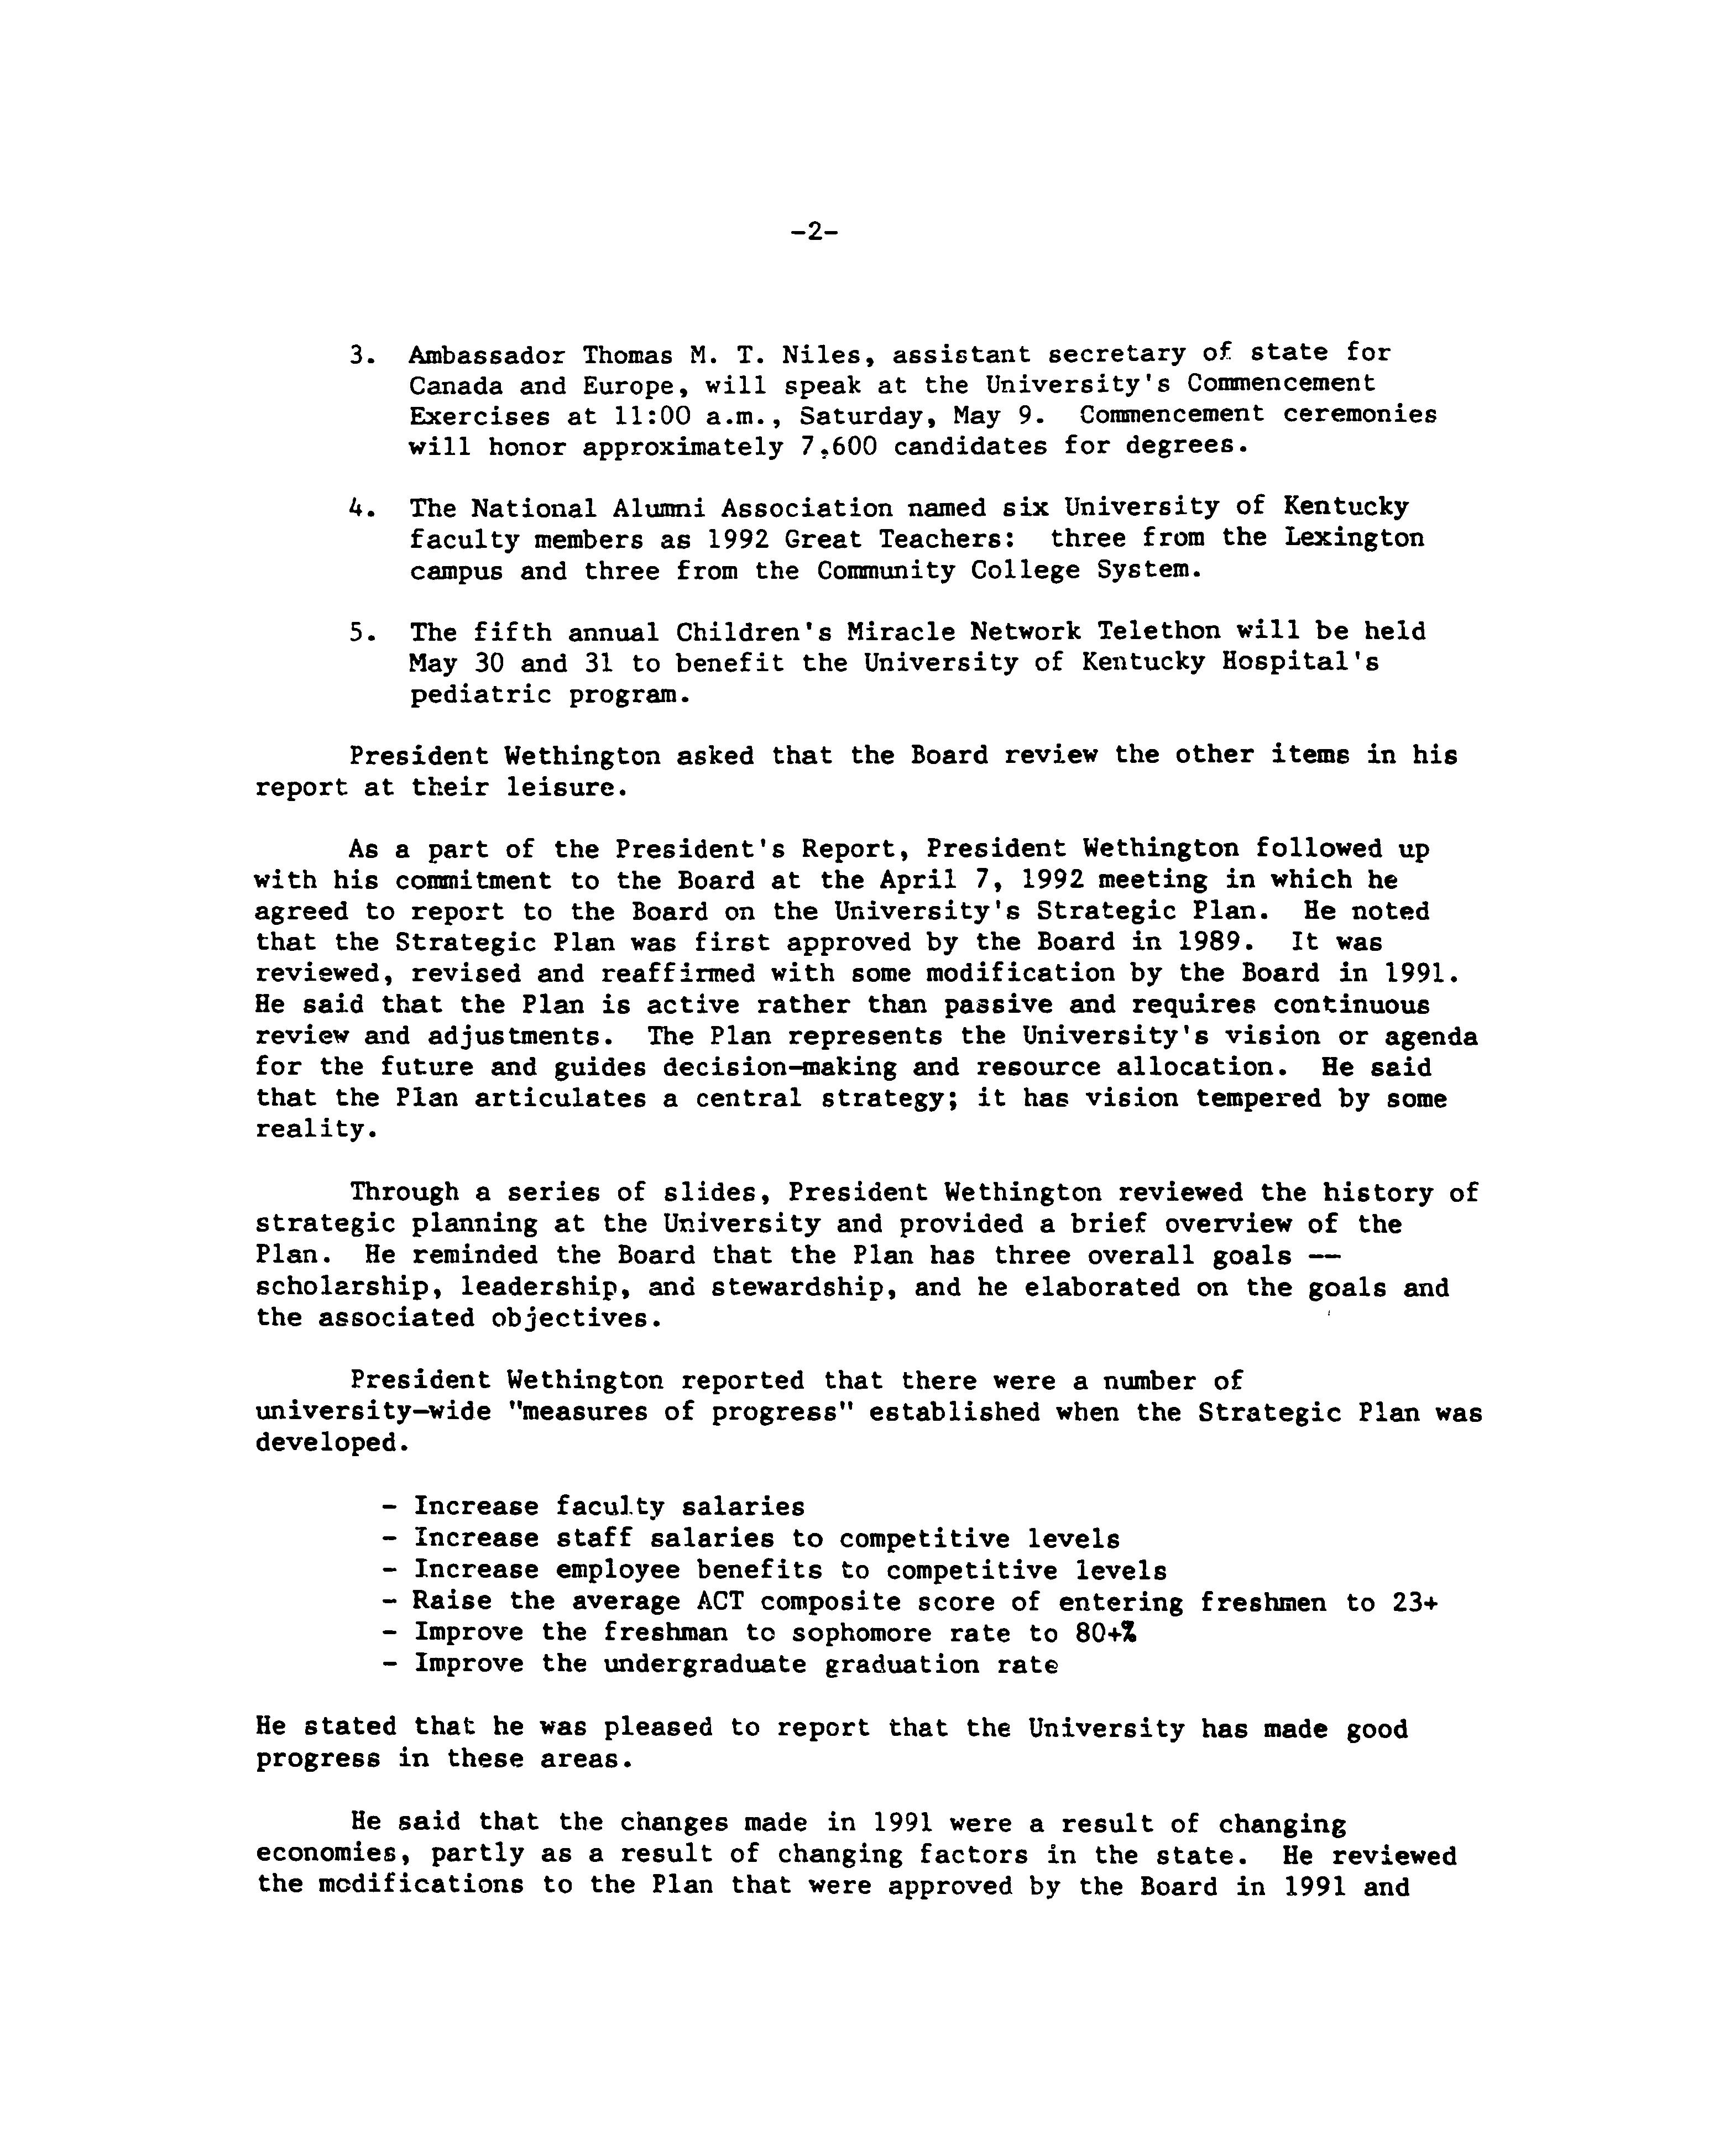 Minutes of the University of Kentucky Board of Trustees, 1992-03-may5.